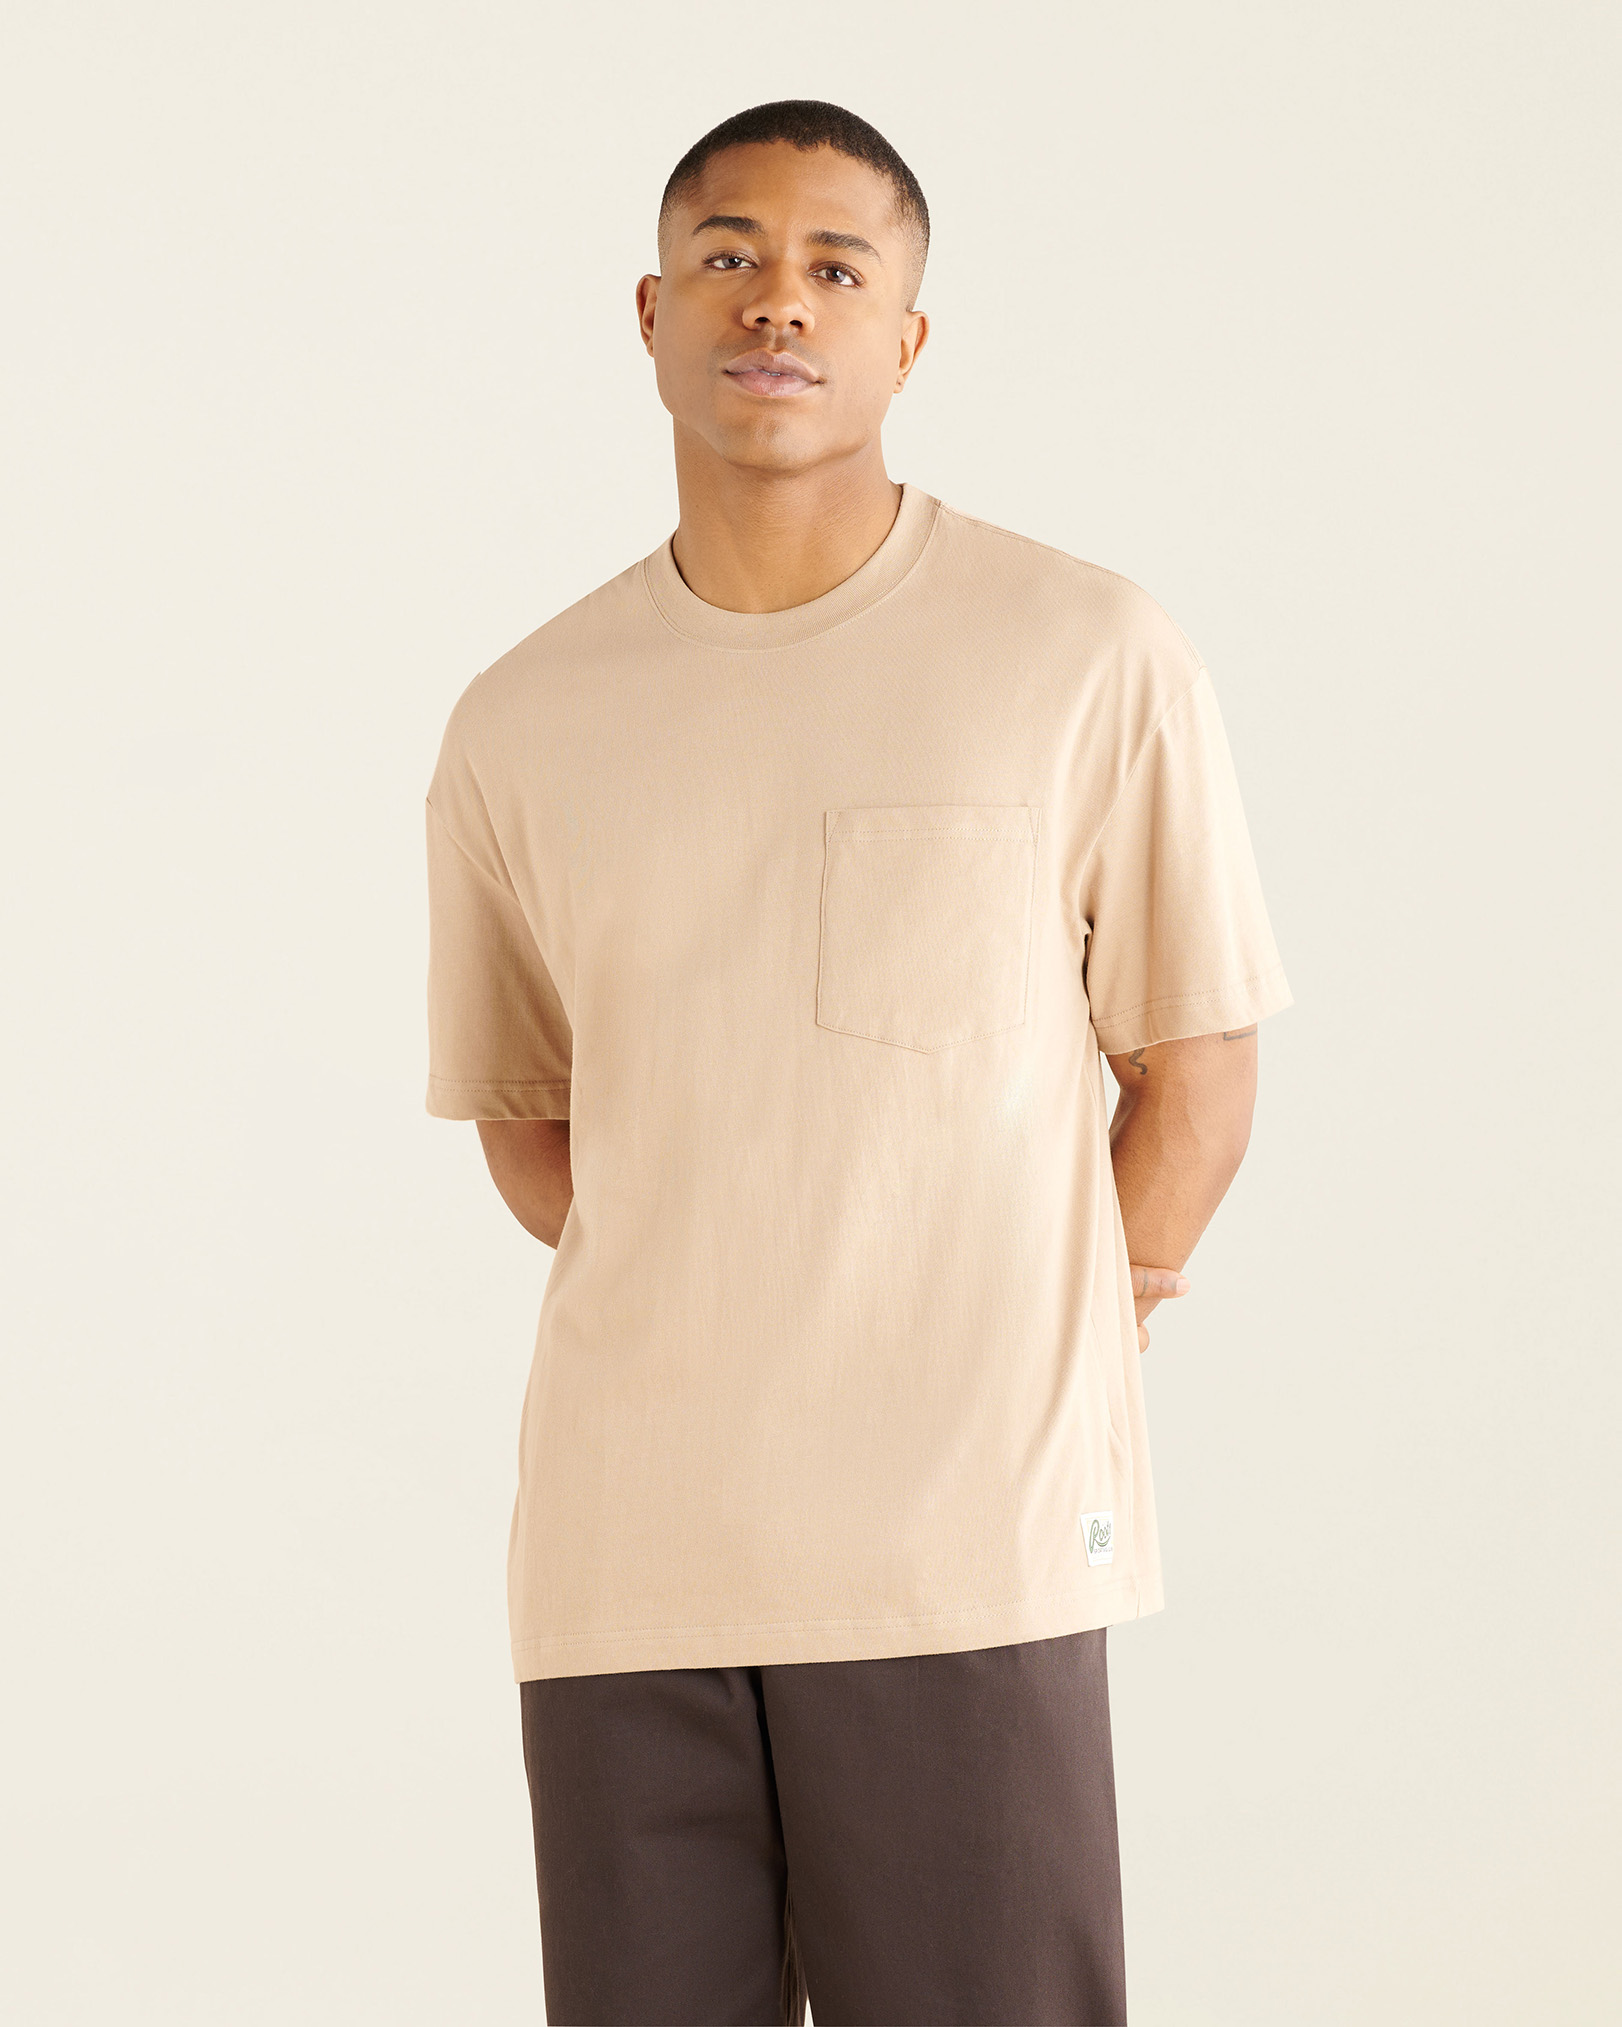 Roots Men's Logo T-Shirt in Warm Stone